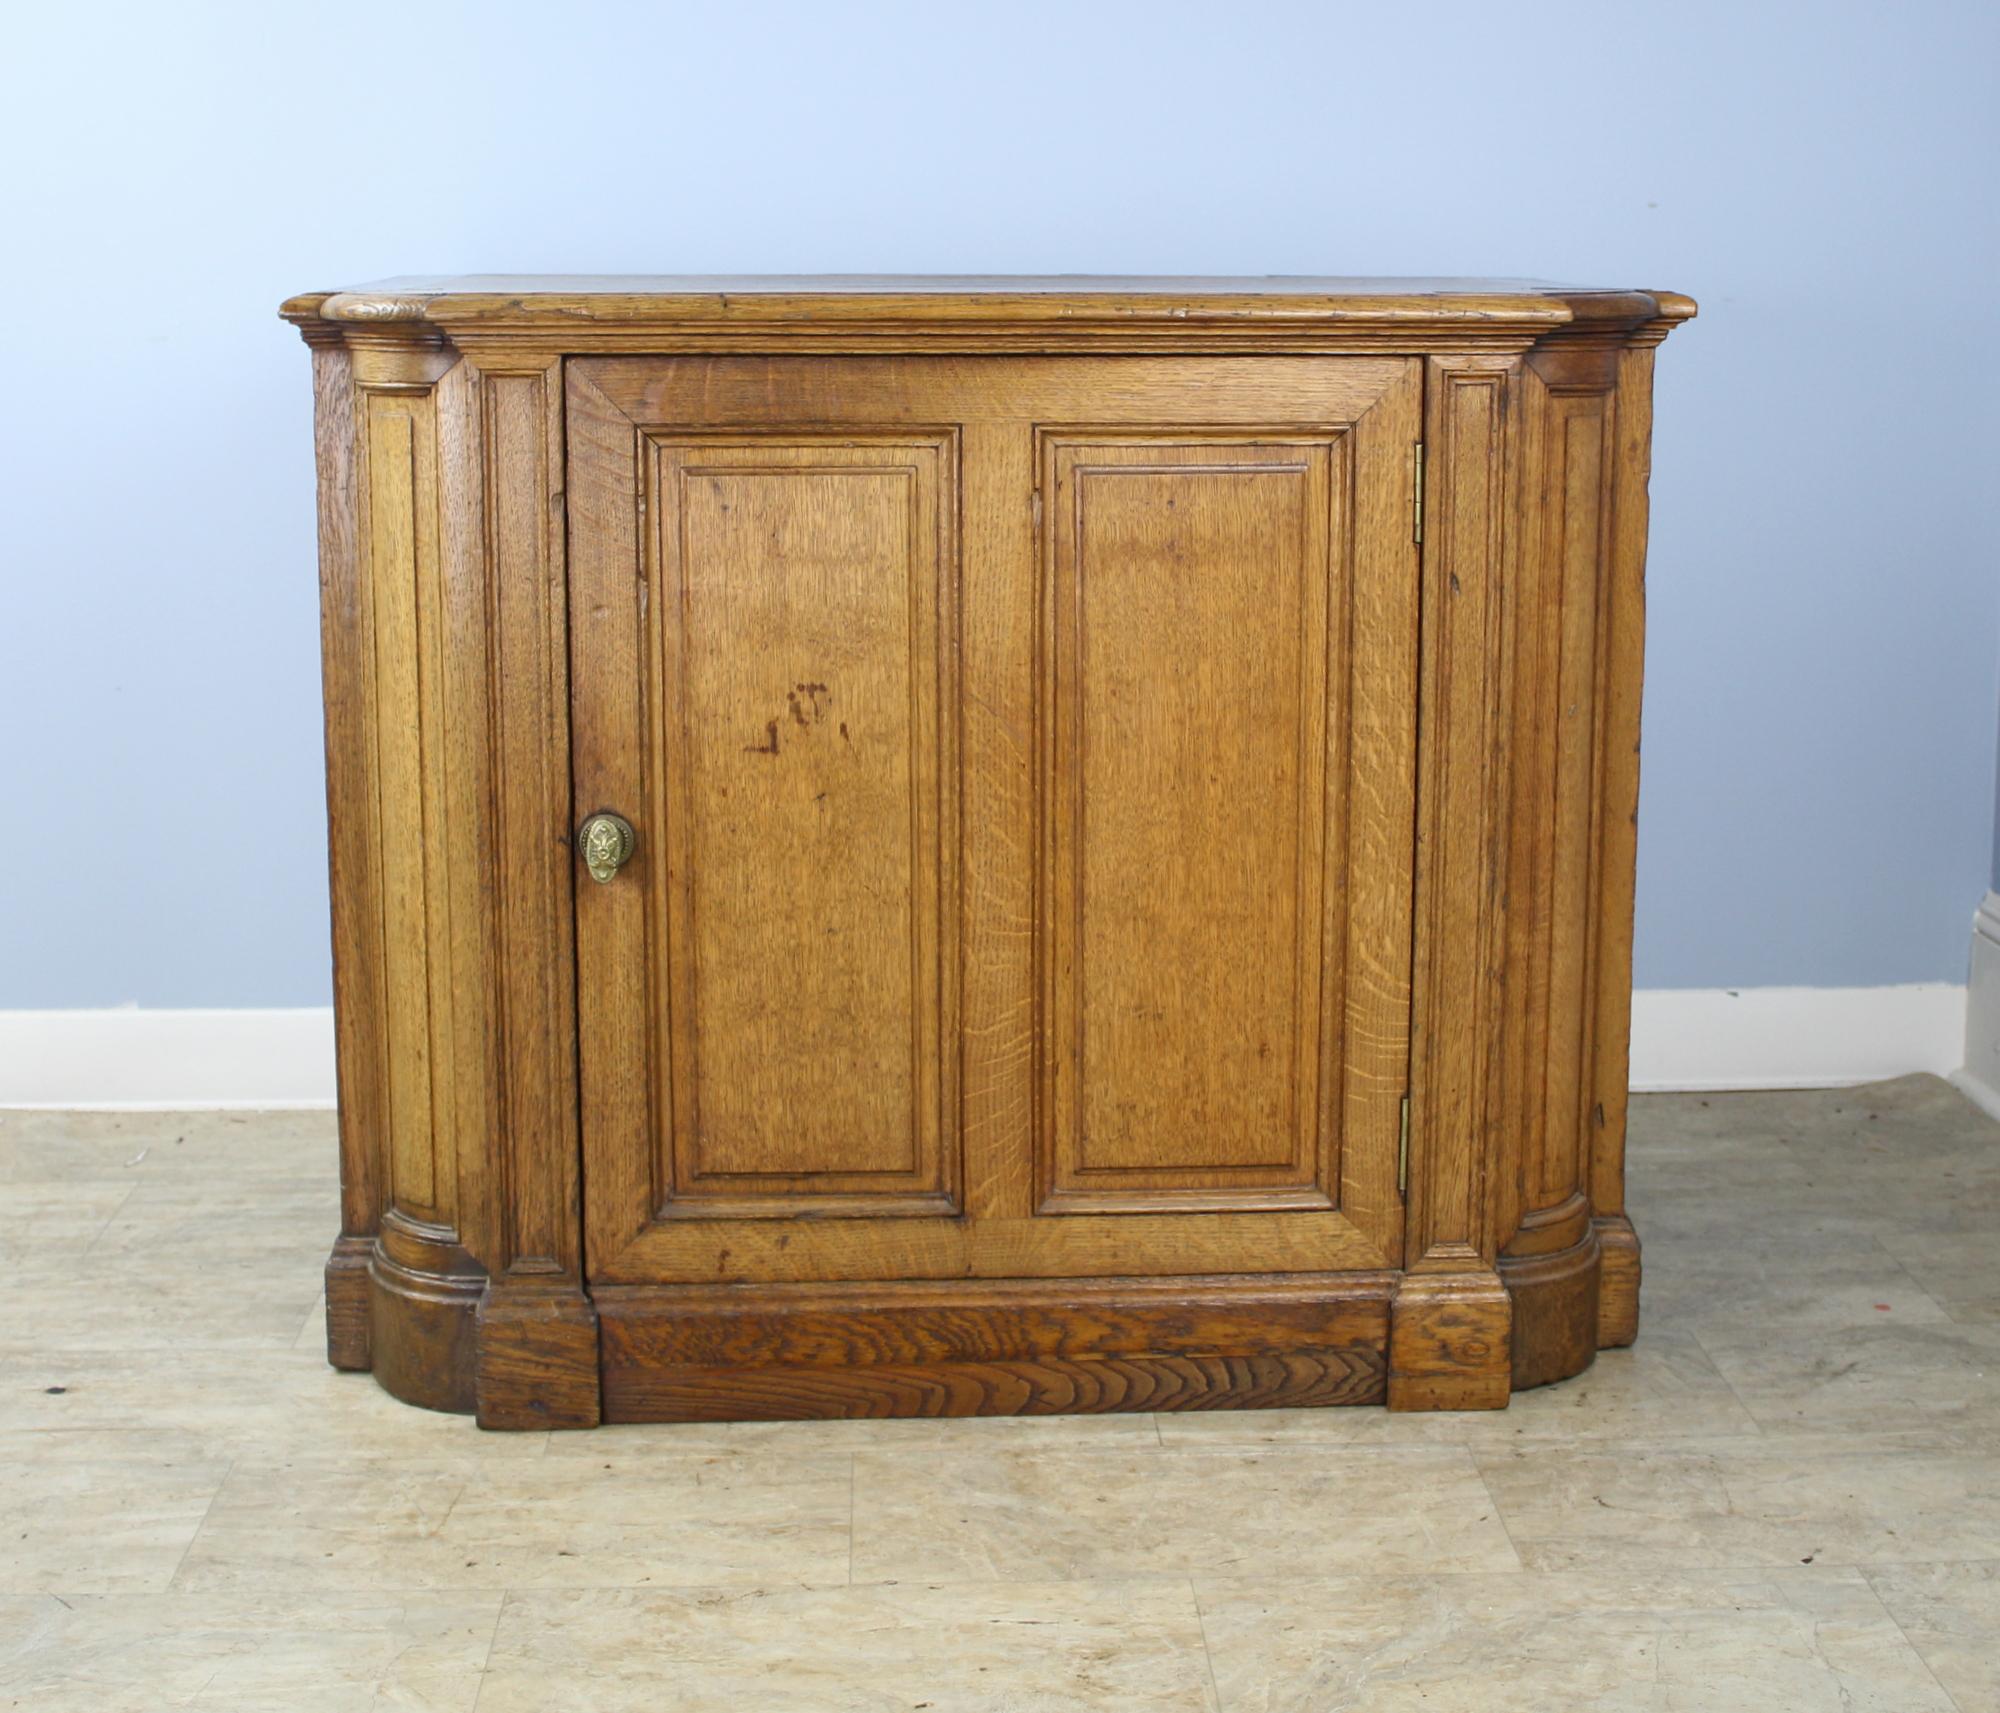 A splendid oak cabinet with good mouldings, inset panels and a detailed plinth. Fine decorative piecework at the corners. Generously proportioned with a deep, clean cupboard and a single non-adjustable shelf. Brass knob closes the door snugly. A